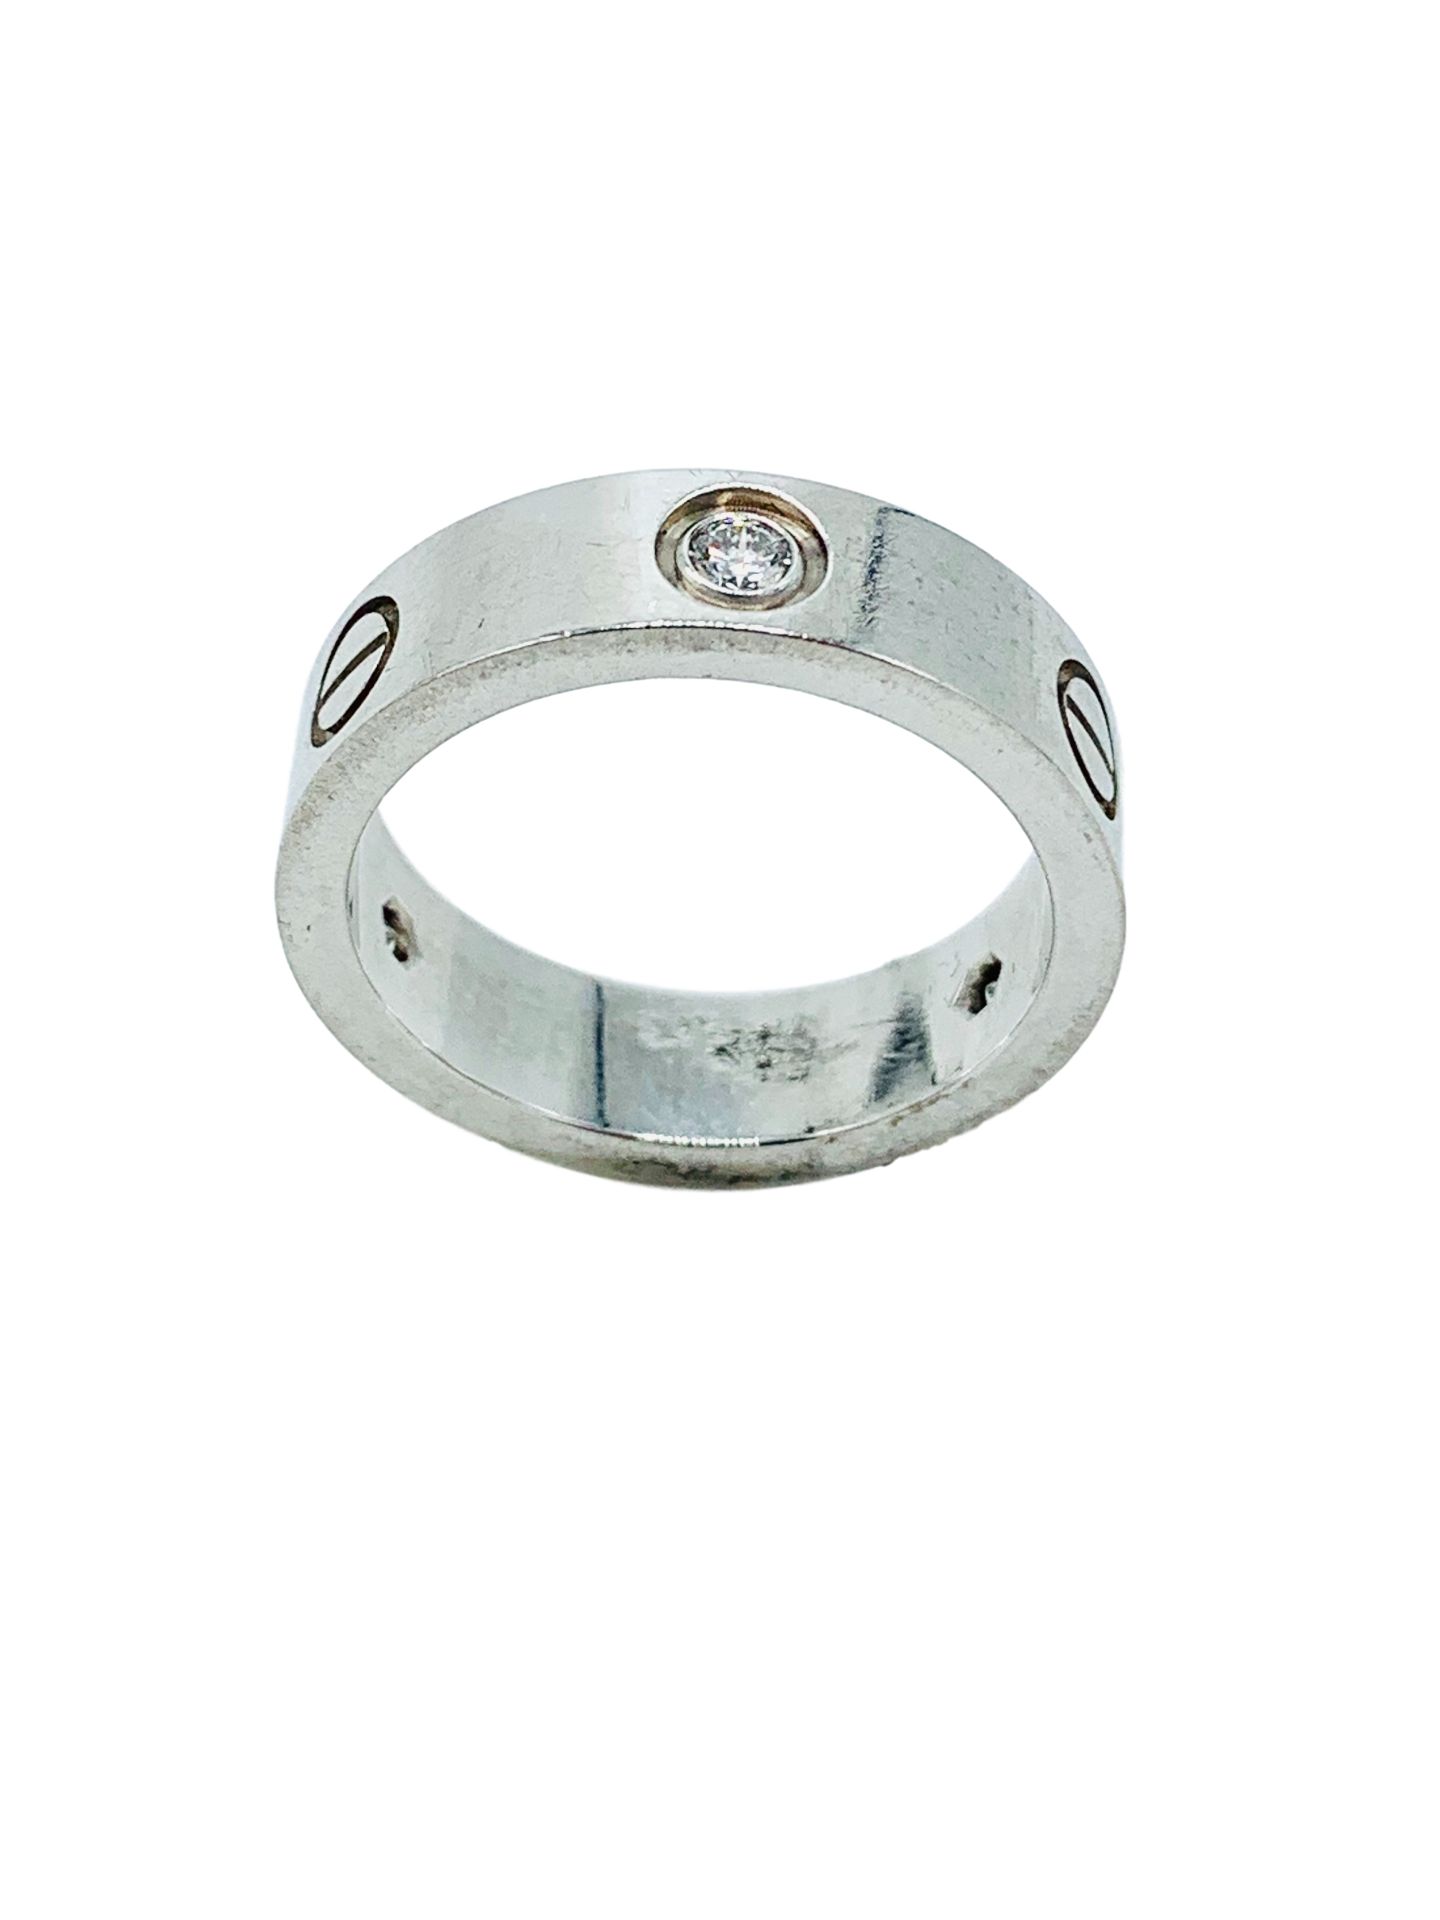 18ct white gold Cartier love ring, set with diamonds. - Image 2 of 4